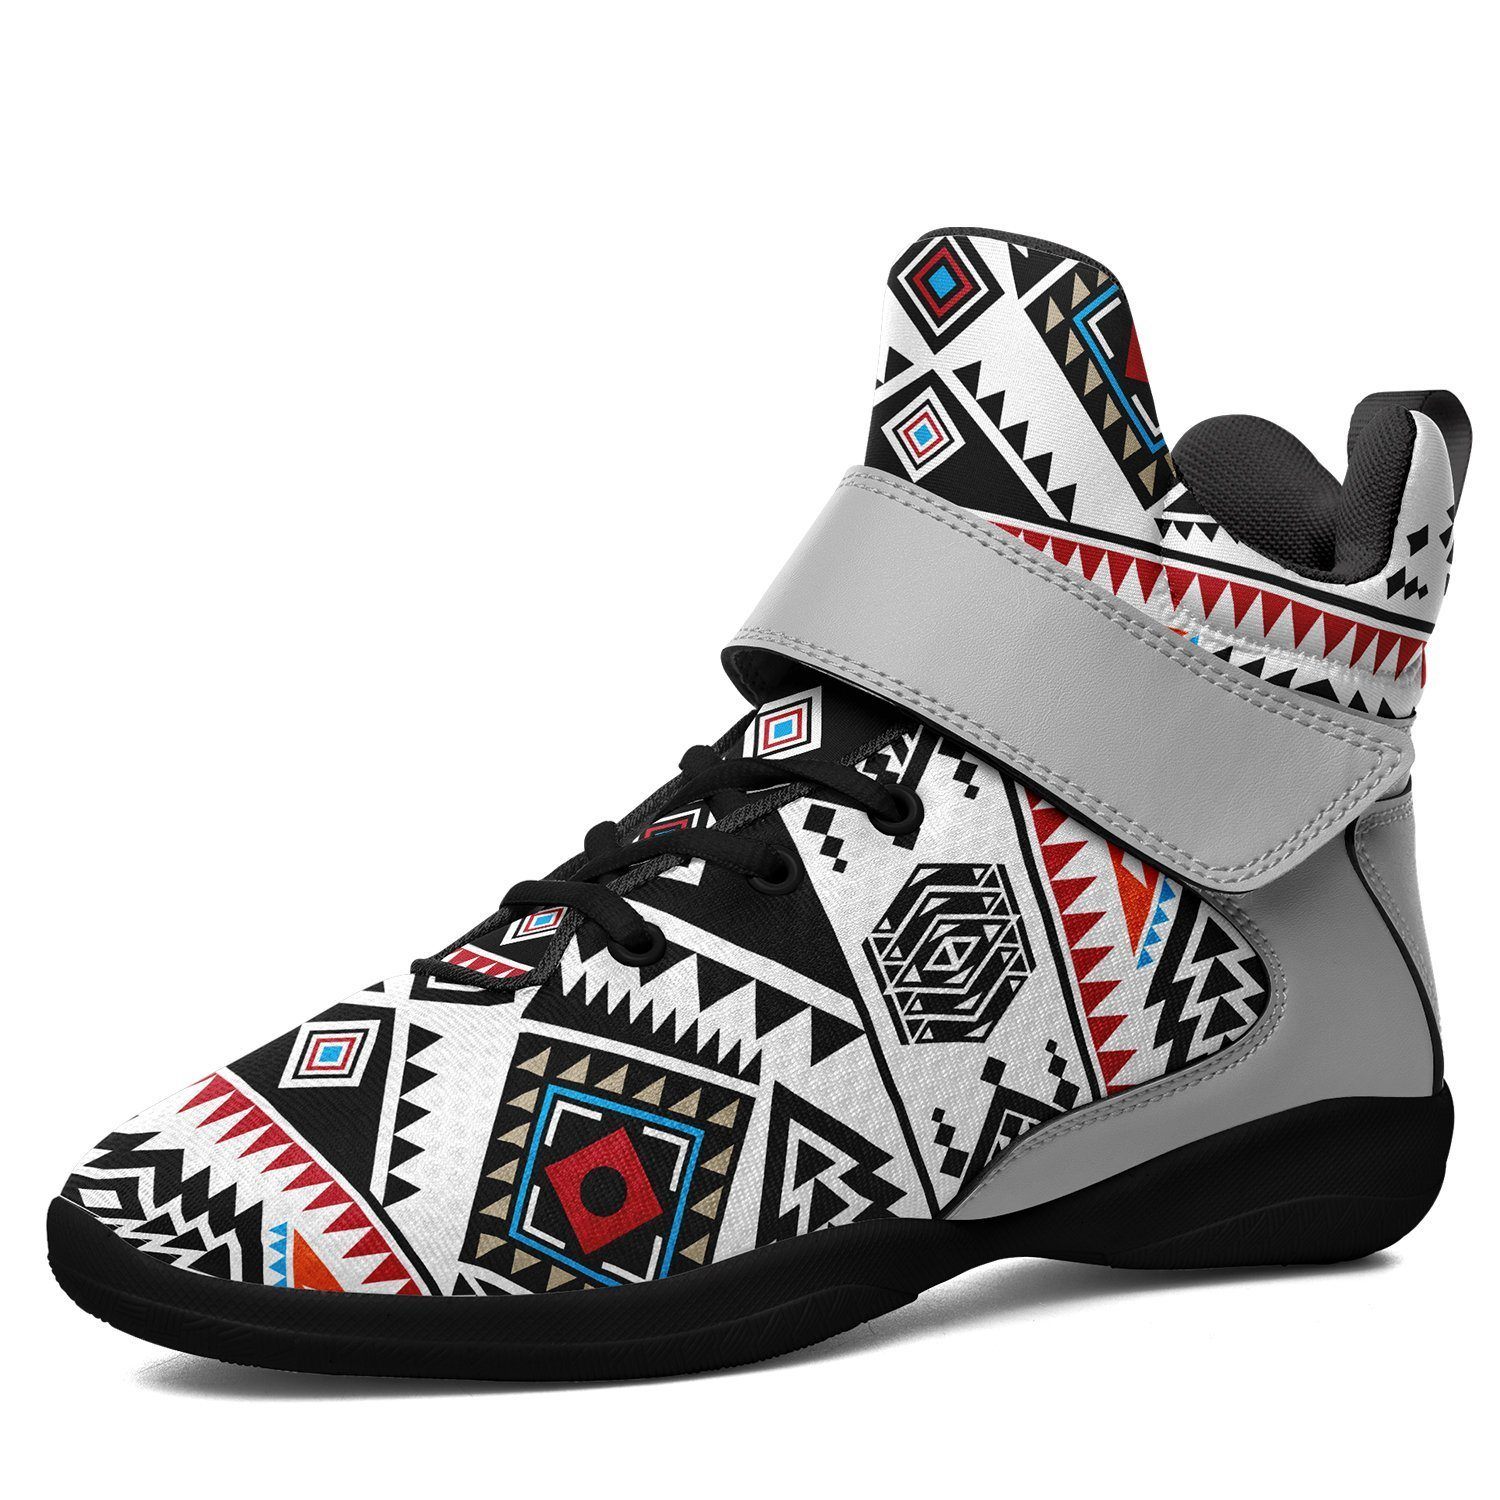 California Coast Ipottaa Basketball / Sport High Top Shoes - Black Sole 49 Dzine US Men 7 / EUR 40 Black Sole with Gray Strap 